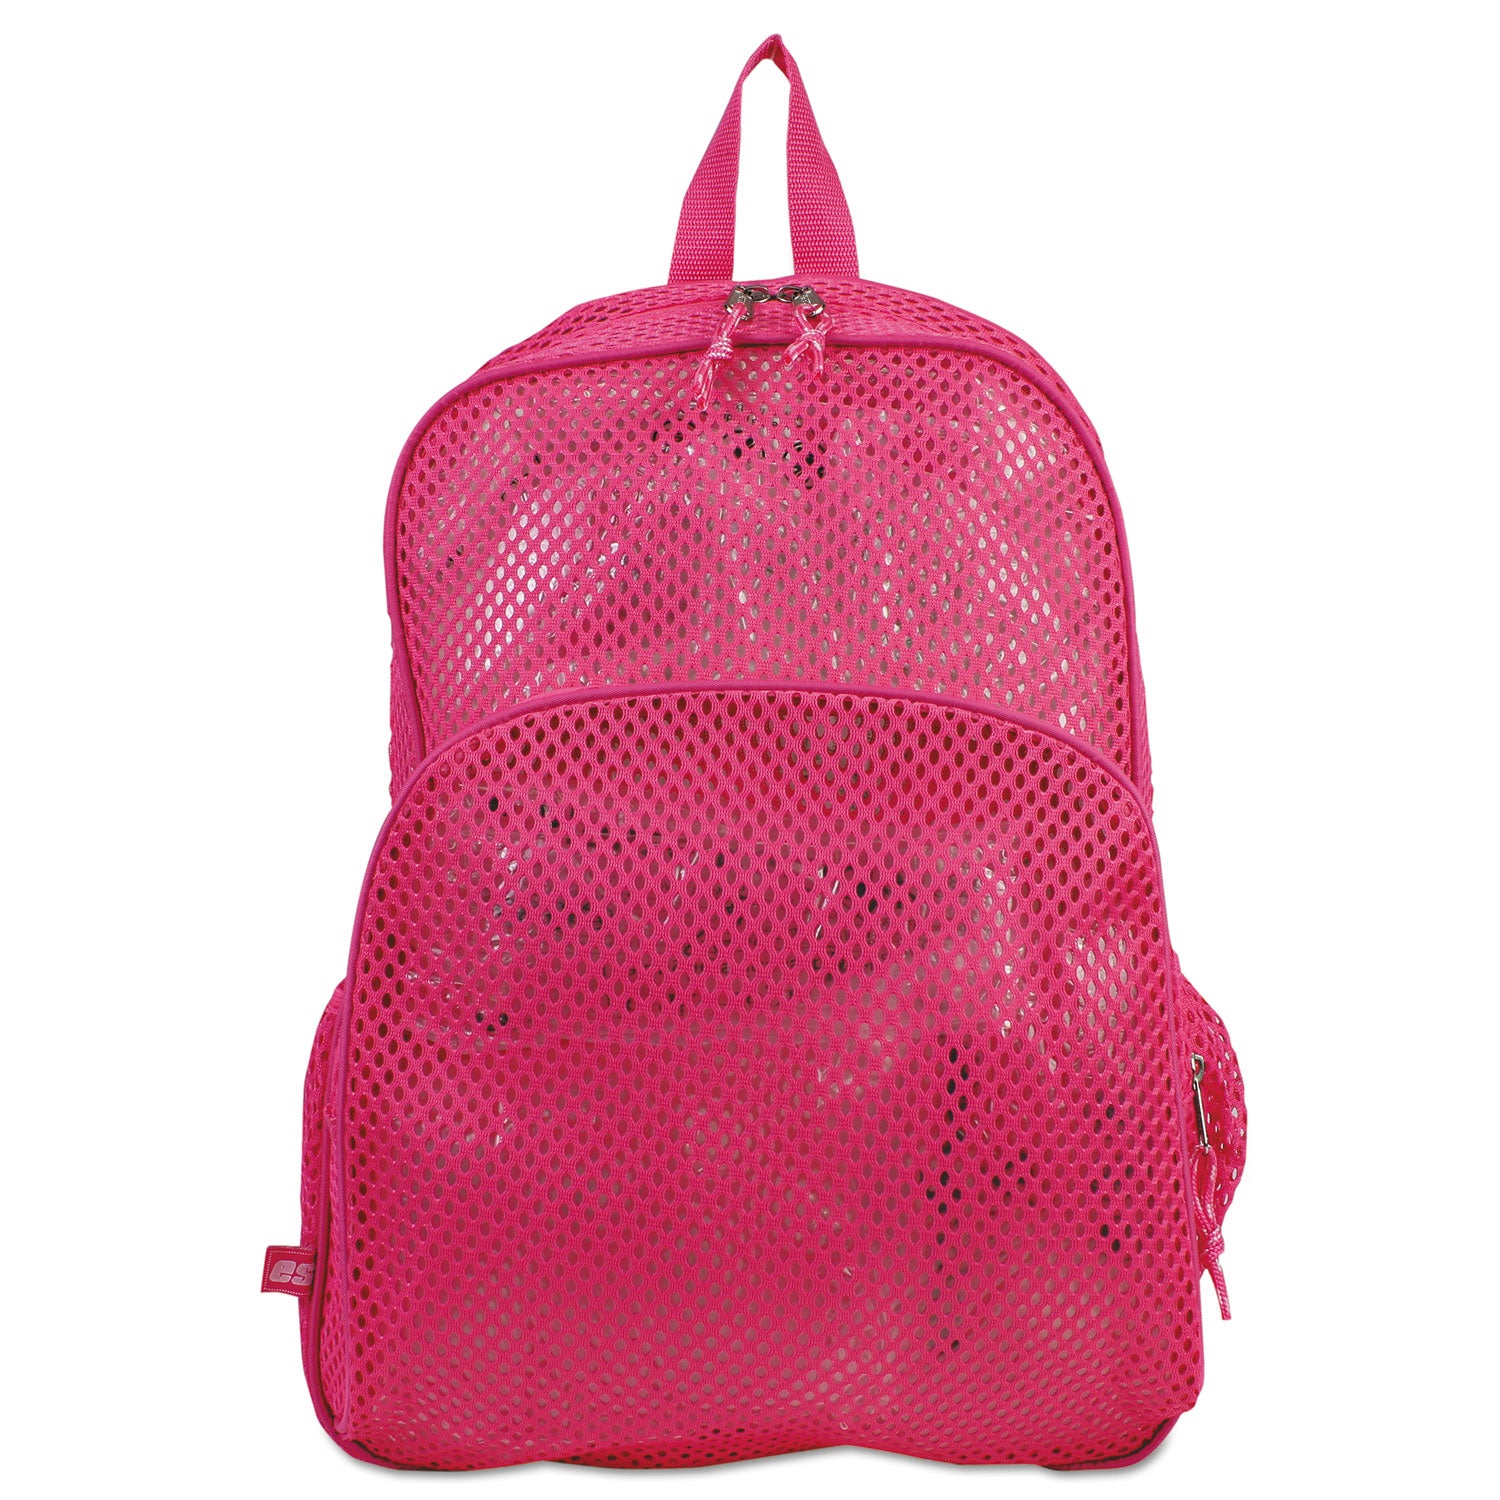 Mesh Backpack, Fits Devices Up to 17", Polyester, 12 x 5 x 18, Clear/English Rose - 